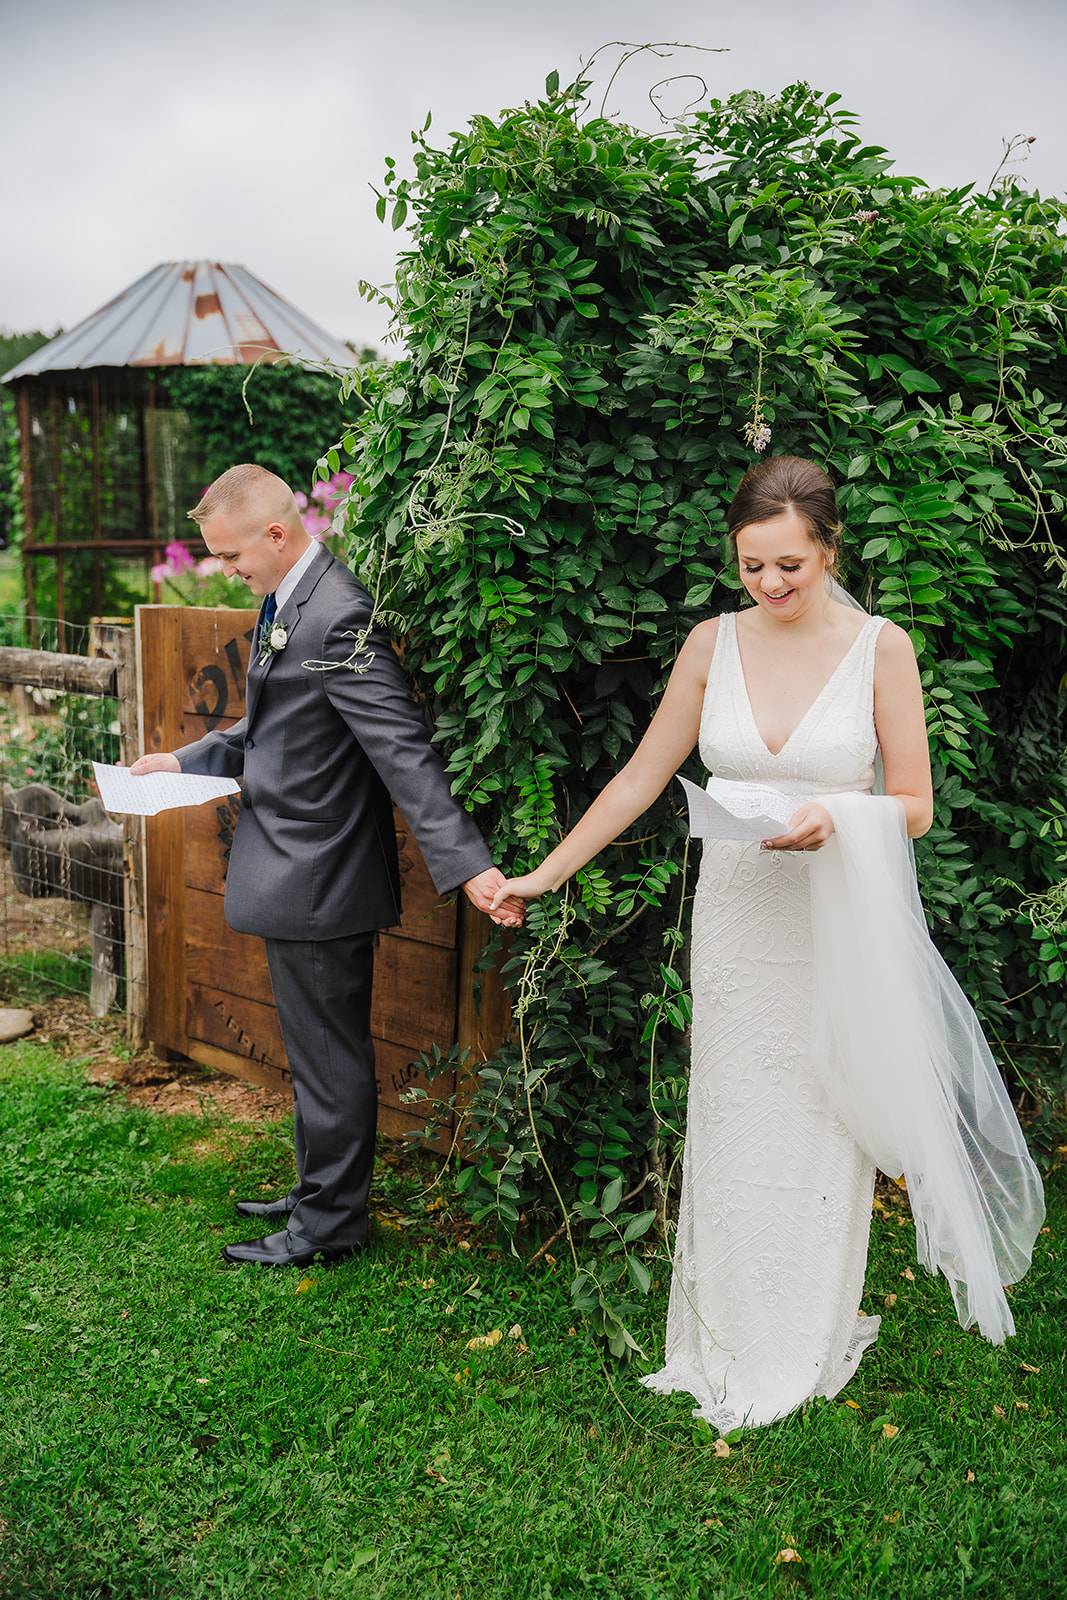 Bride and groom share letters with each other before their apple orchard wedding ceremony. Spring Wisconsin wedding First look Love letters#dixonappleorchard #orchardweddingvenue #outdoorwedding #appleorchardwedding #wisconsinweddingvenue